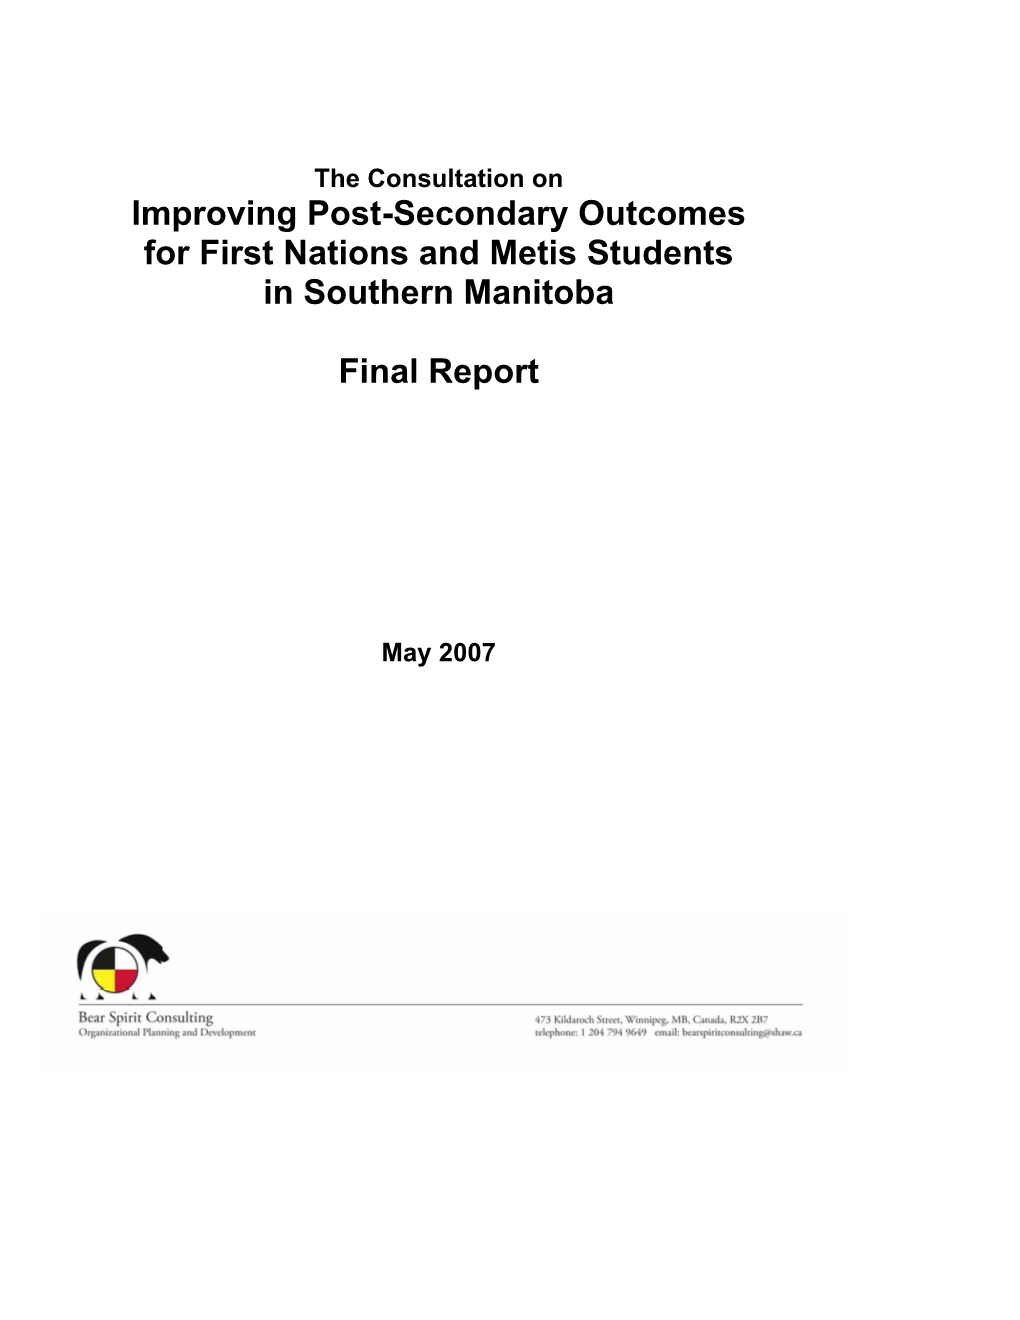 Improving Post-Secondary Outcomes for First Nations and Metis Students in Southern Manitoba